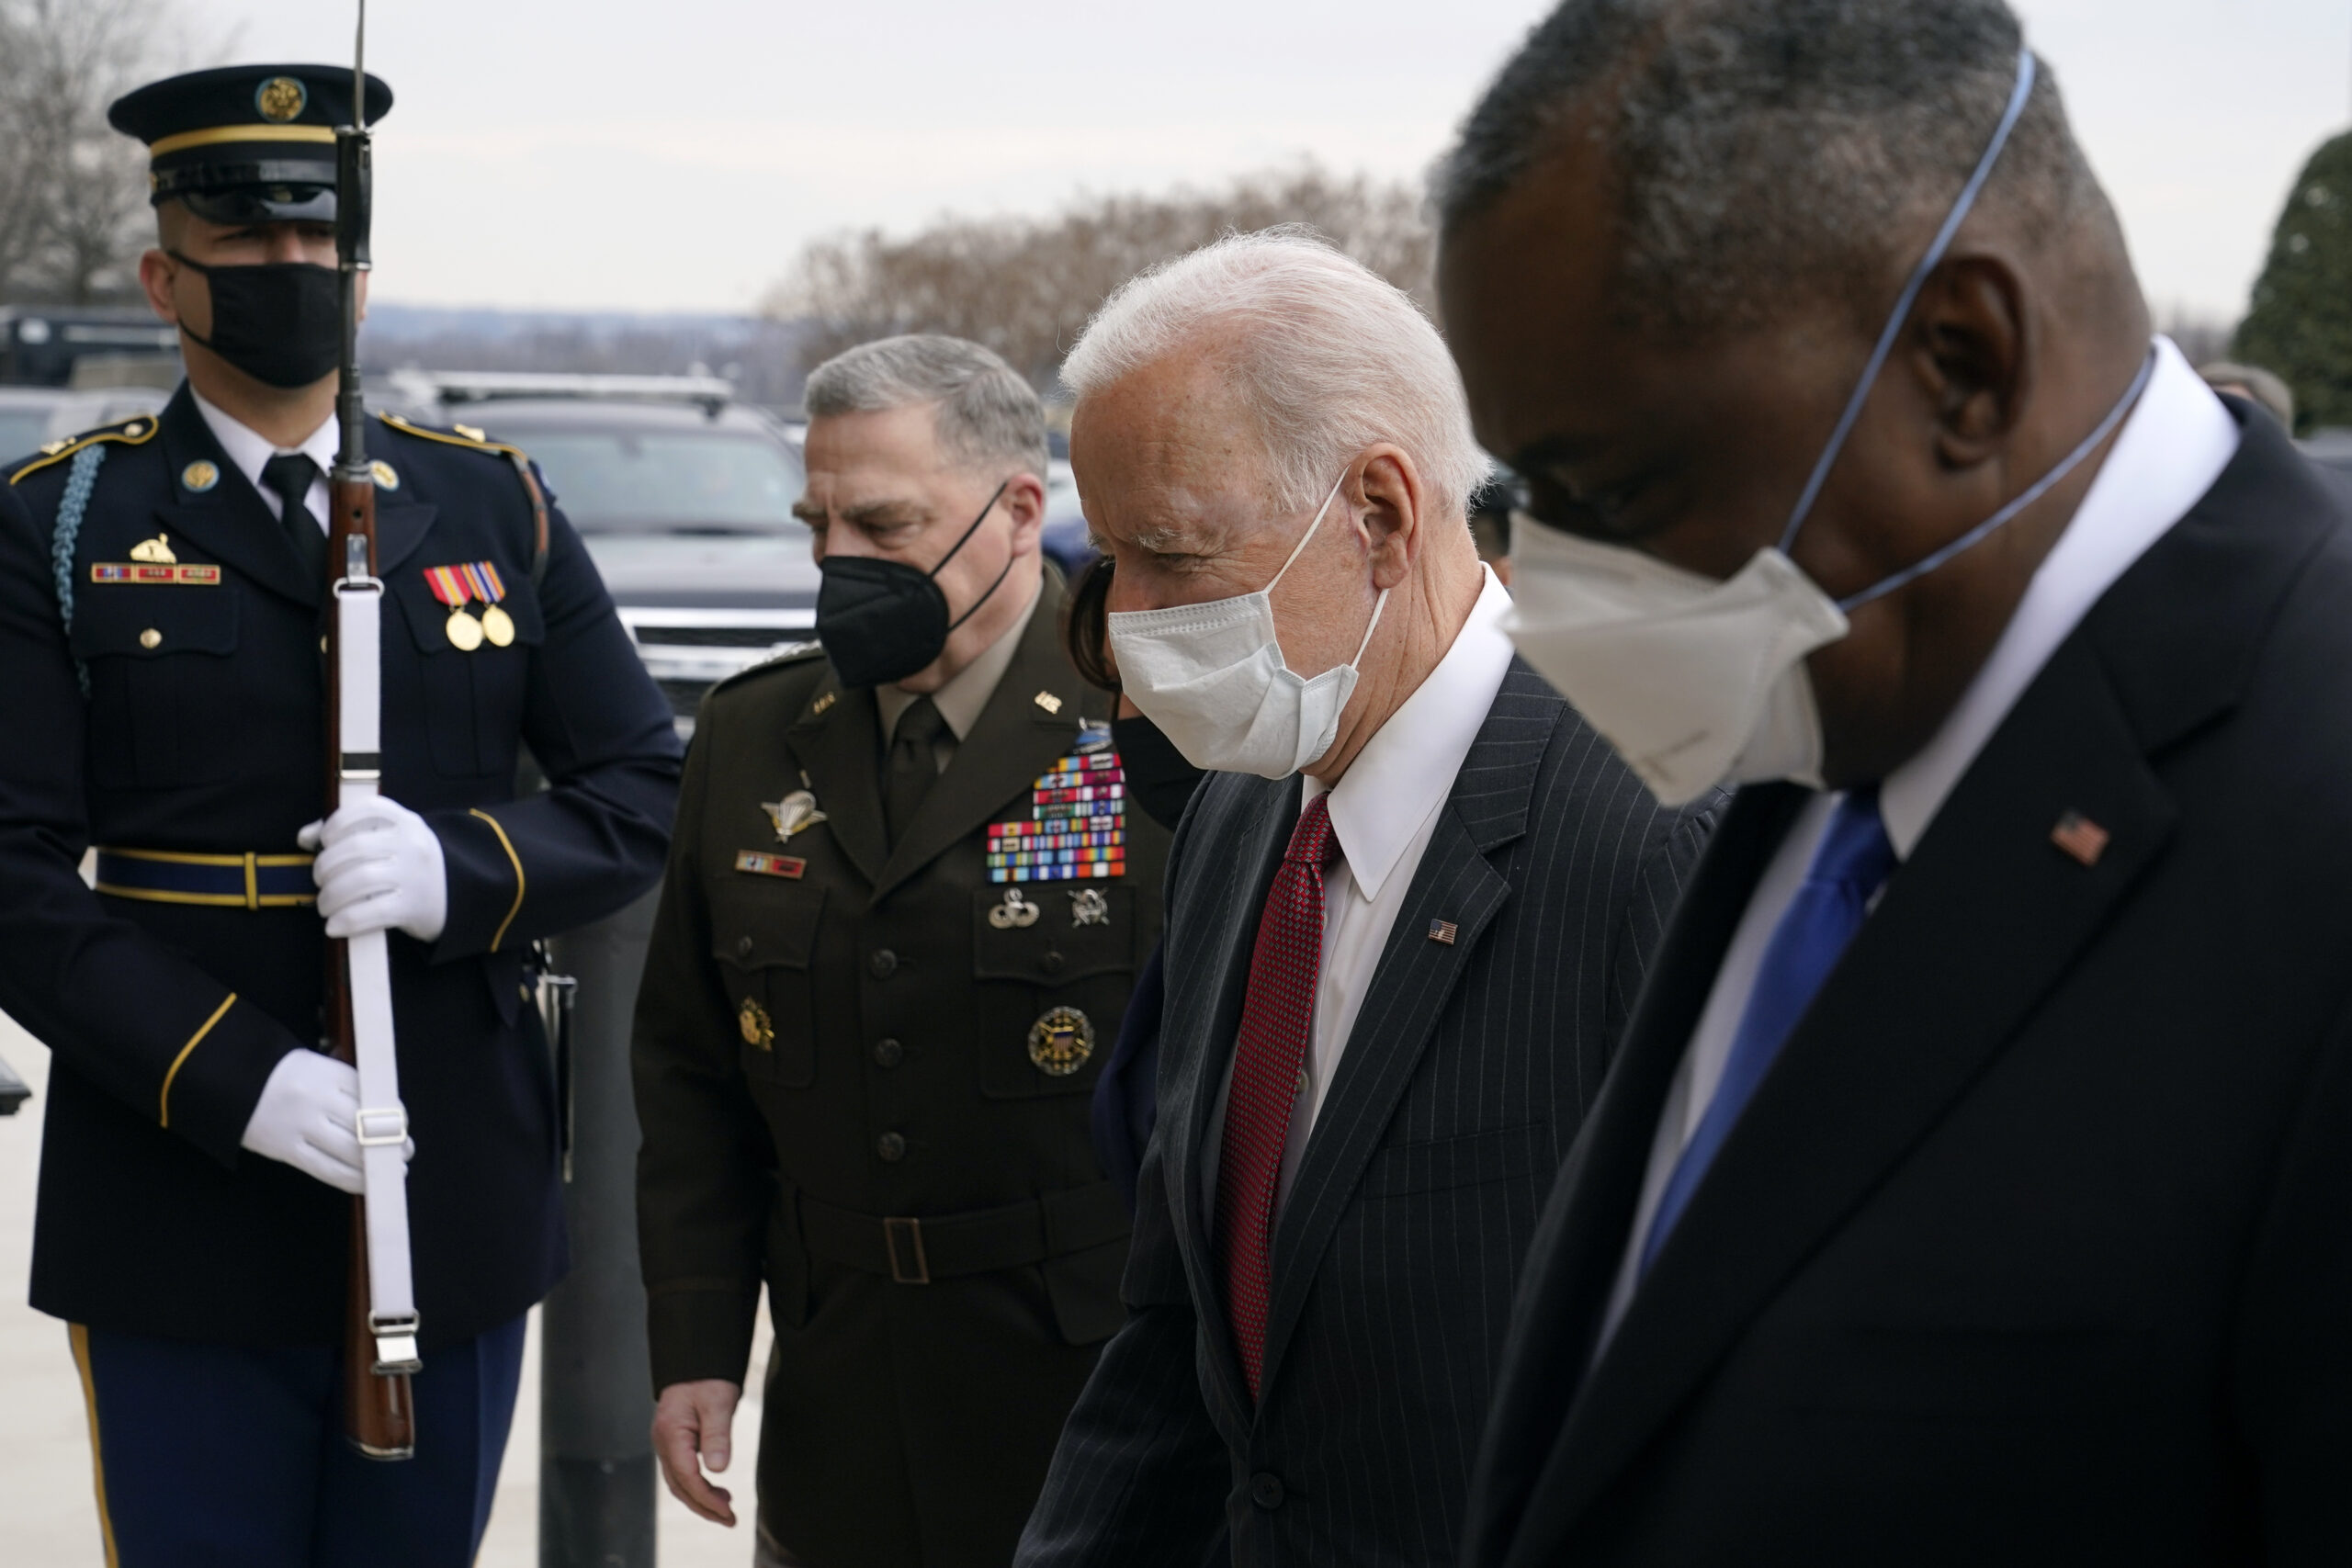 FILE - In this Feb. 10, 2021, file photo, President Joe Biden walks with Joint Chiefs Chairman Gen. Mark Milley, second from left, and Defense Secretary Lloyd Austin as he arrives at the Pentagon in Washington. Milley says he is now open to considering a proposal to take decisions on sexual assault prosecution out of the hands of military commanders. This is a potentially significant shift in the debate over combating sexual assault in the military.(AP Photo/Patrick Semansky, File)